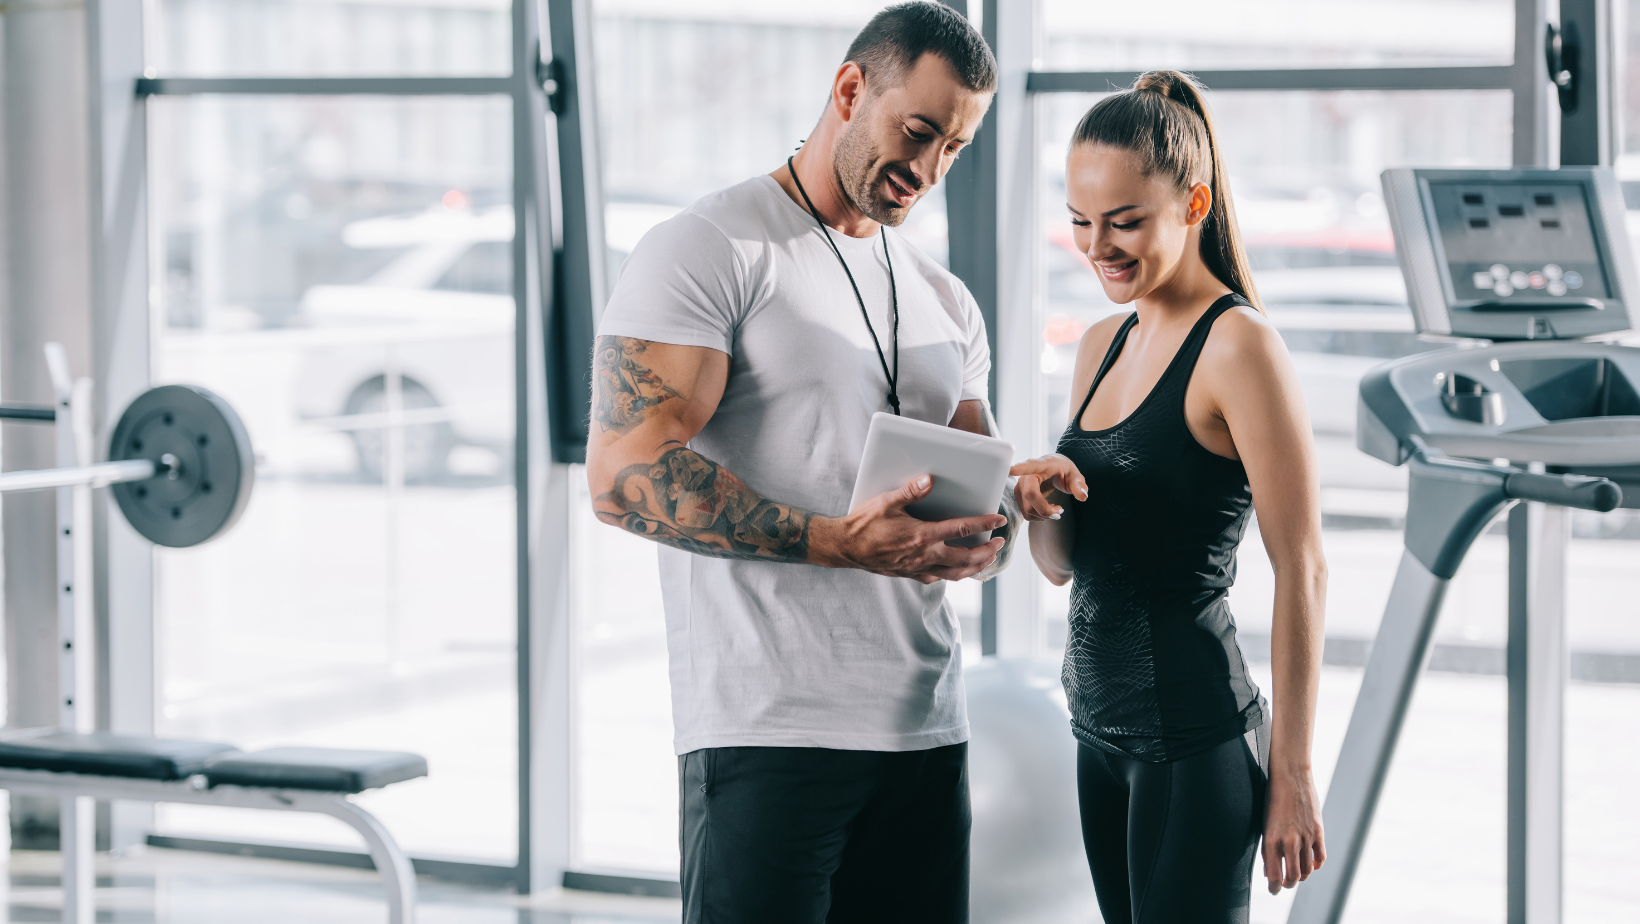 What are the Top 10 Benefits of Hiring a Personal Trainer?